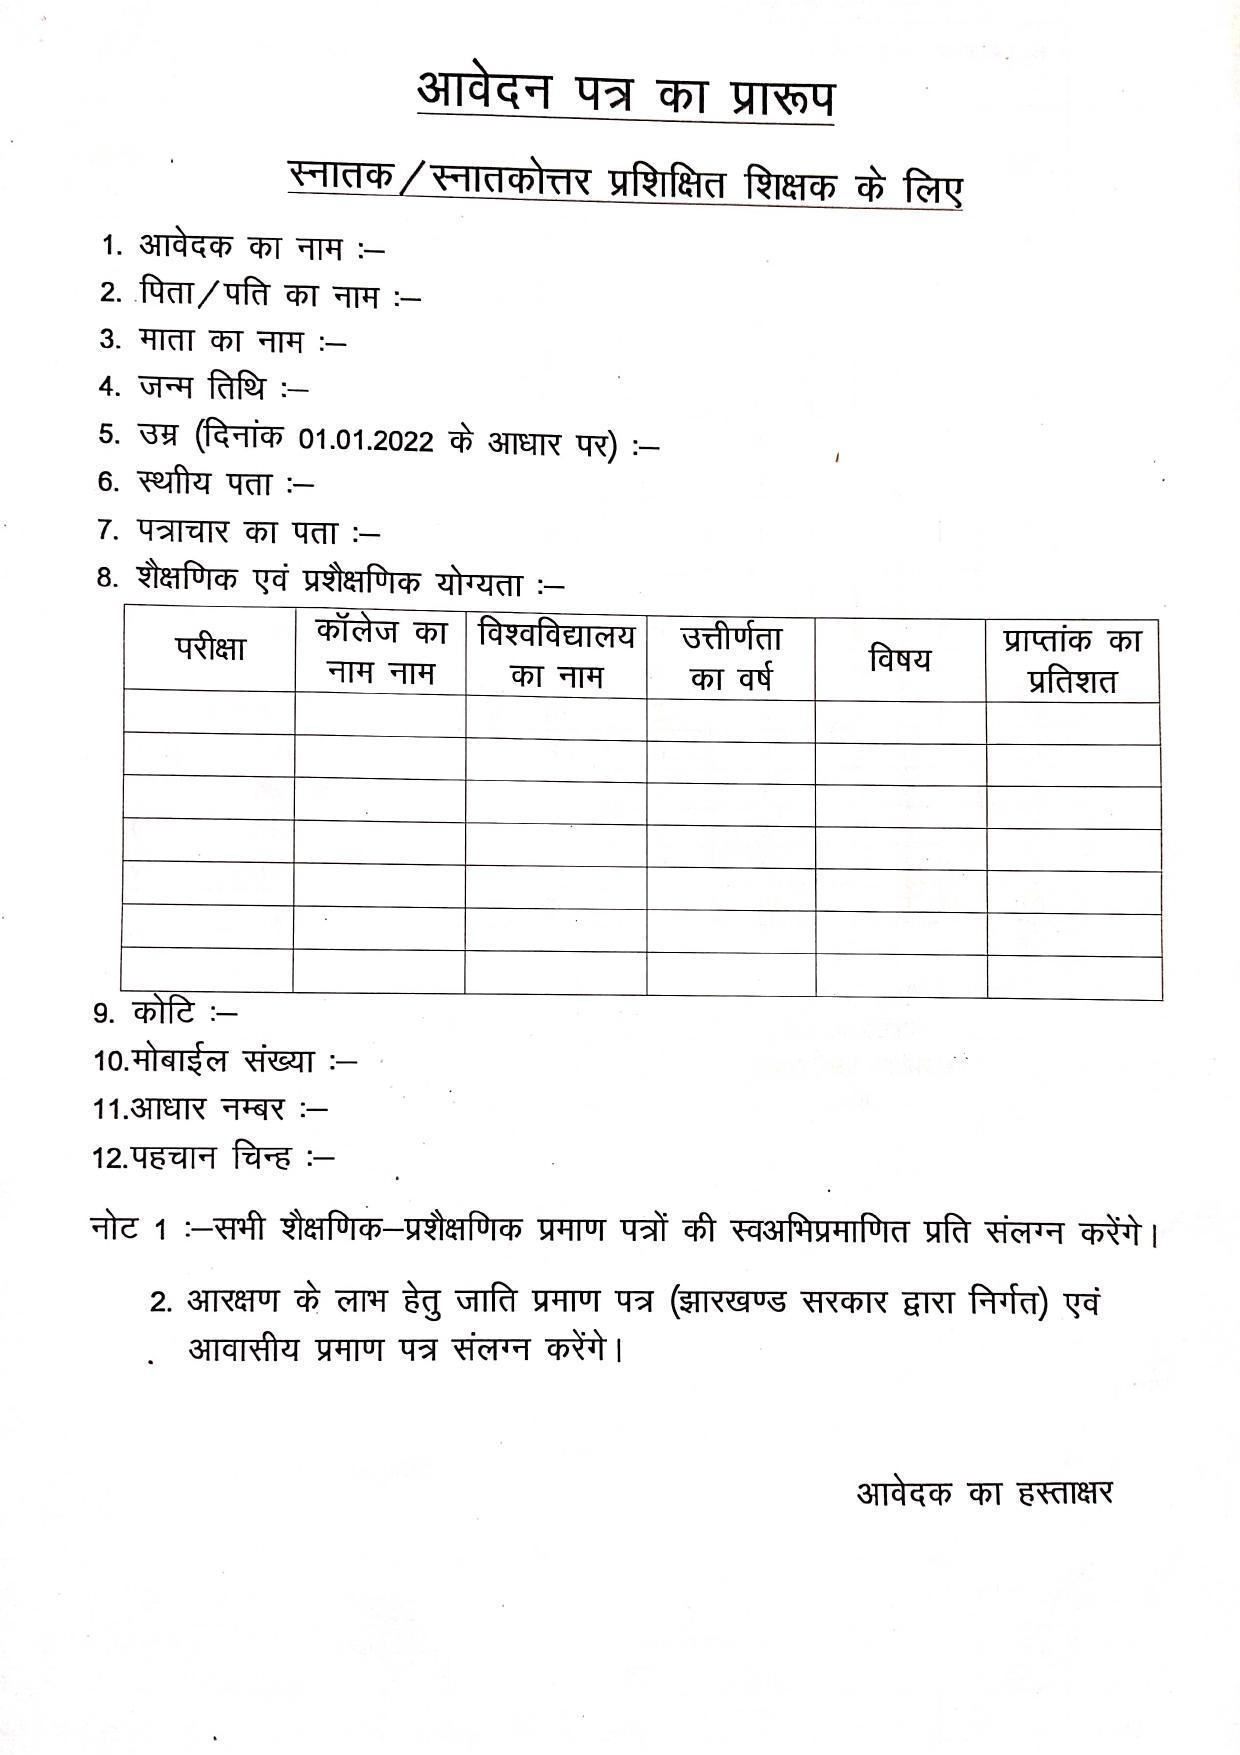 Dhanbad District Jharkhand Invites Application for 182 Graduate Trainee Teachers Recruitment 2022 - Page 4